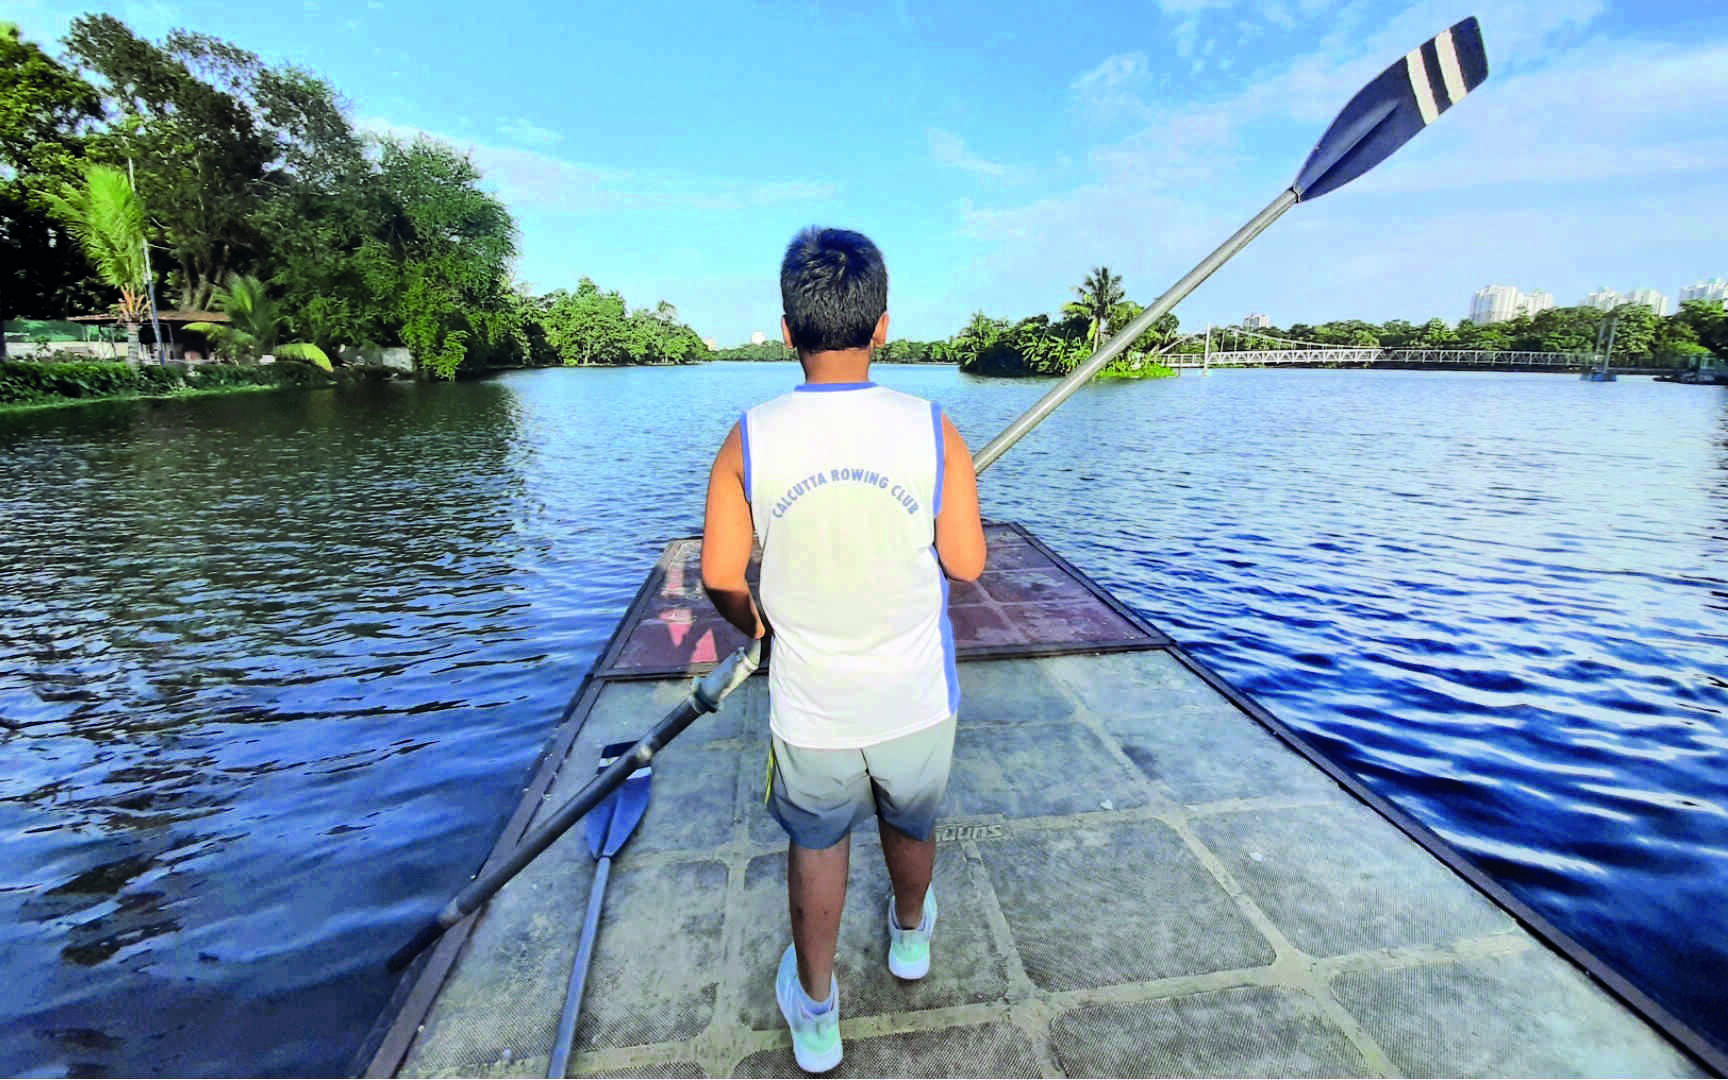 Rowing club conducts capsize drill demonstration